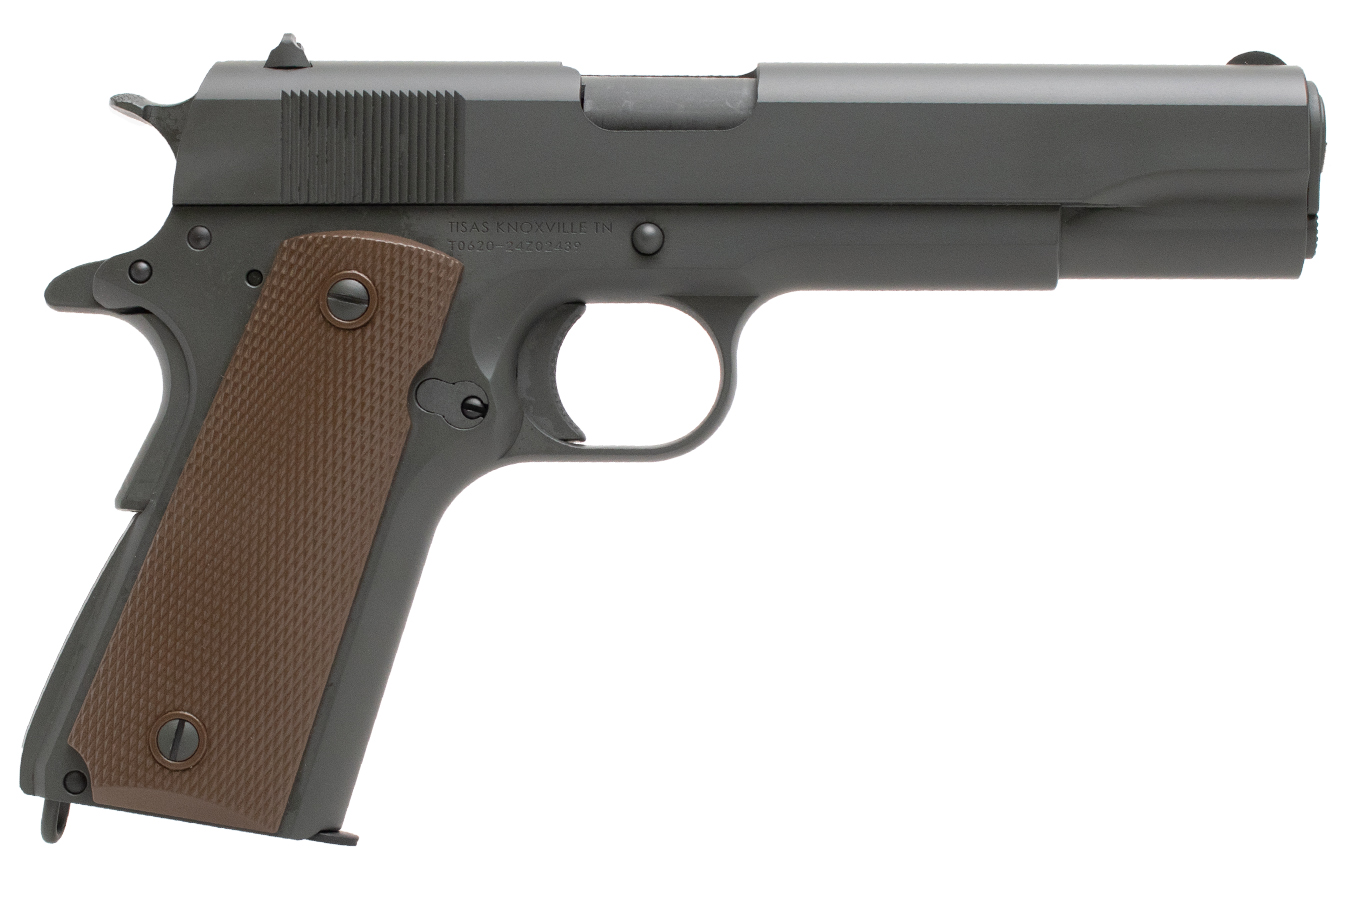 No. 17 Best Selling: TISAS 1911 A1 45 ACP 5 IN BBL GRAY CERAKOTE 1 MAG